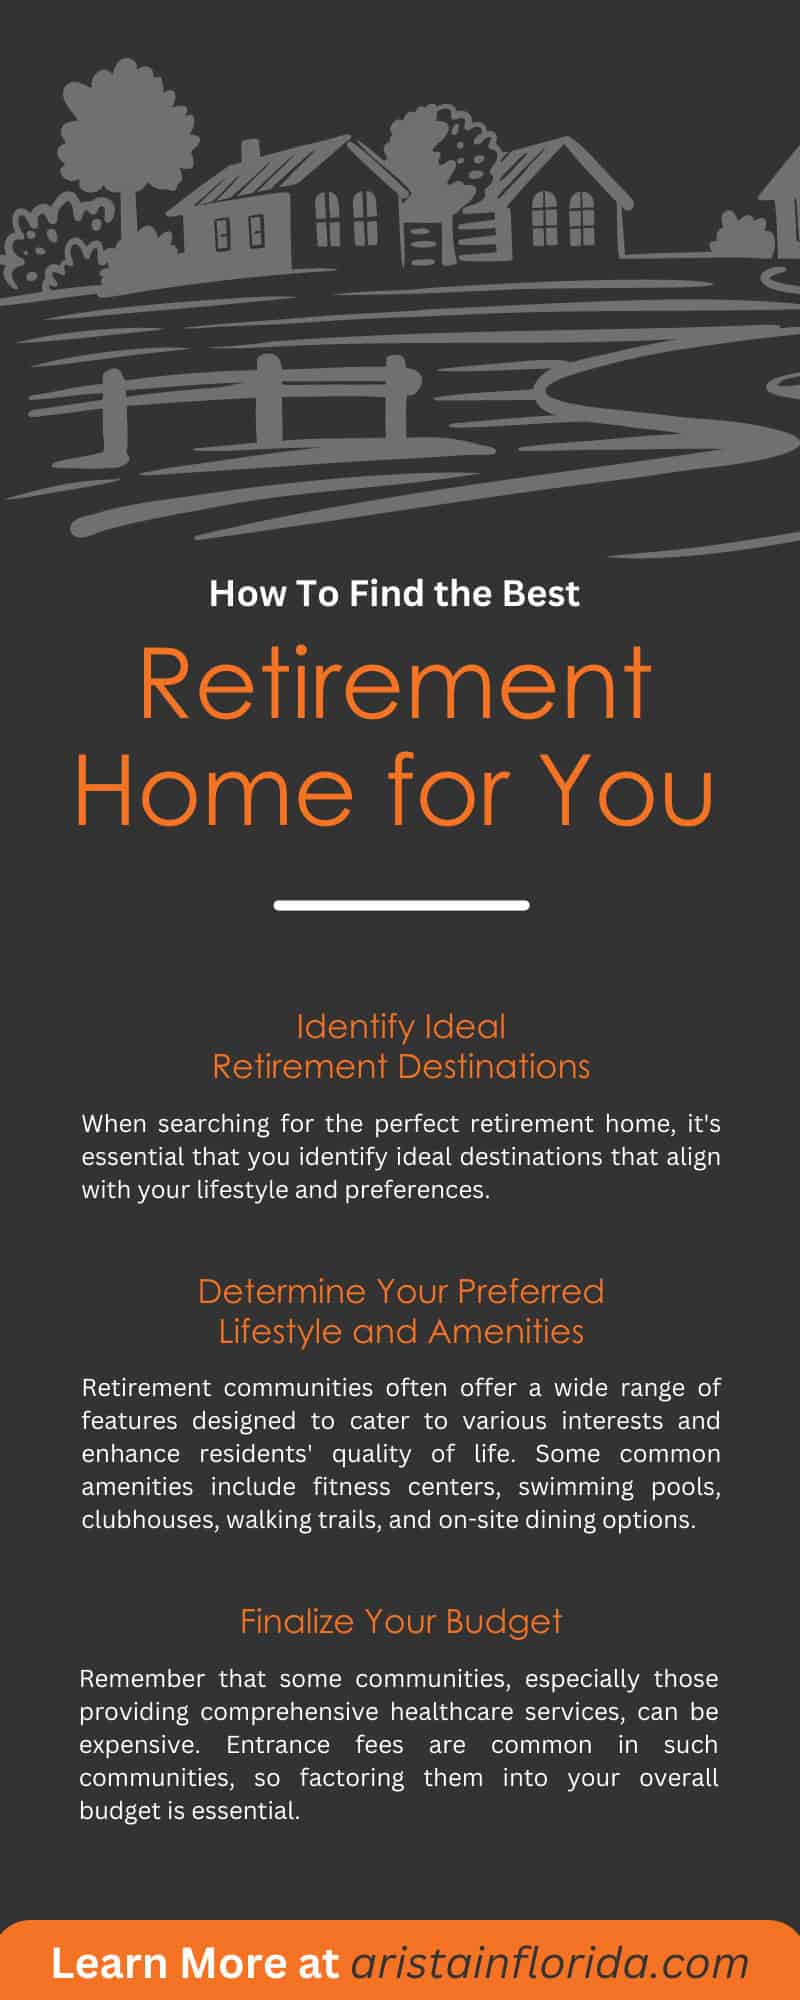 How To Find the Best Retirement Home for You 